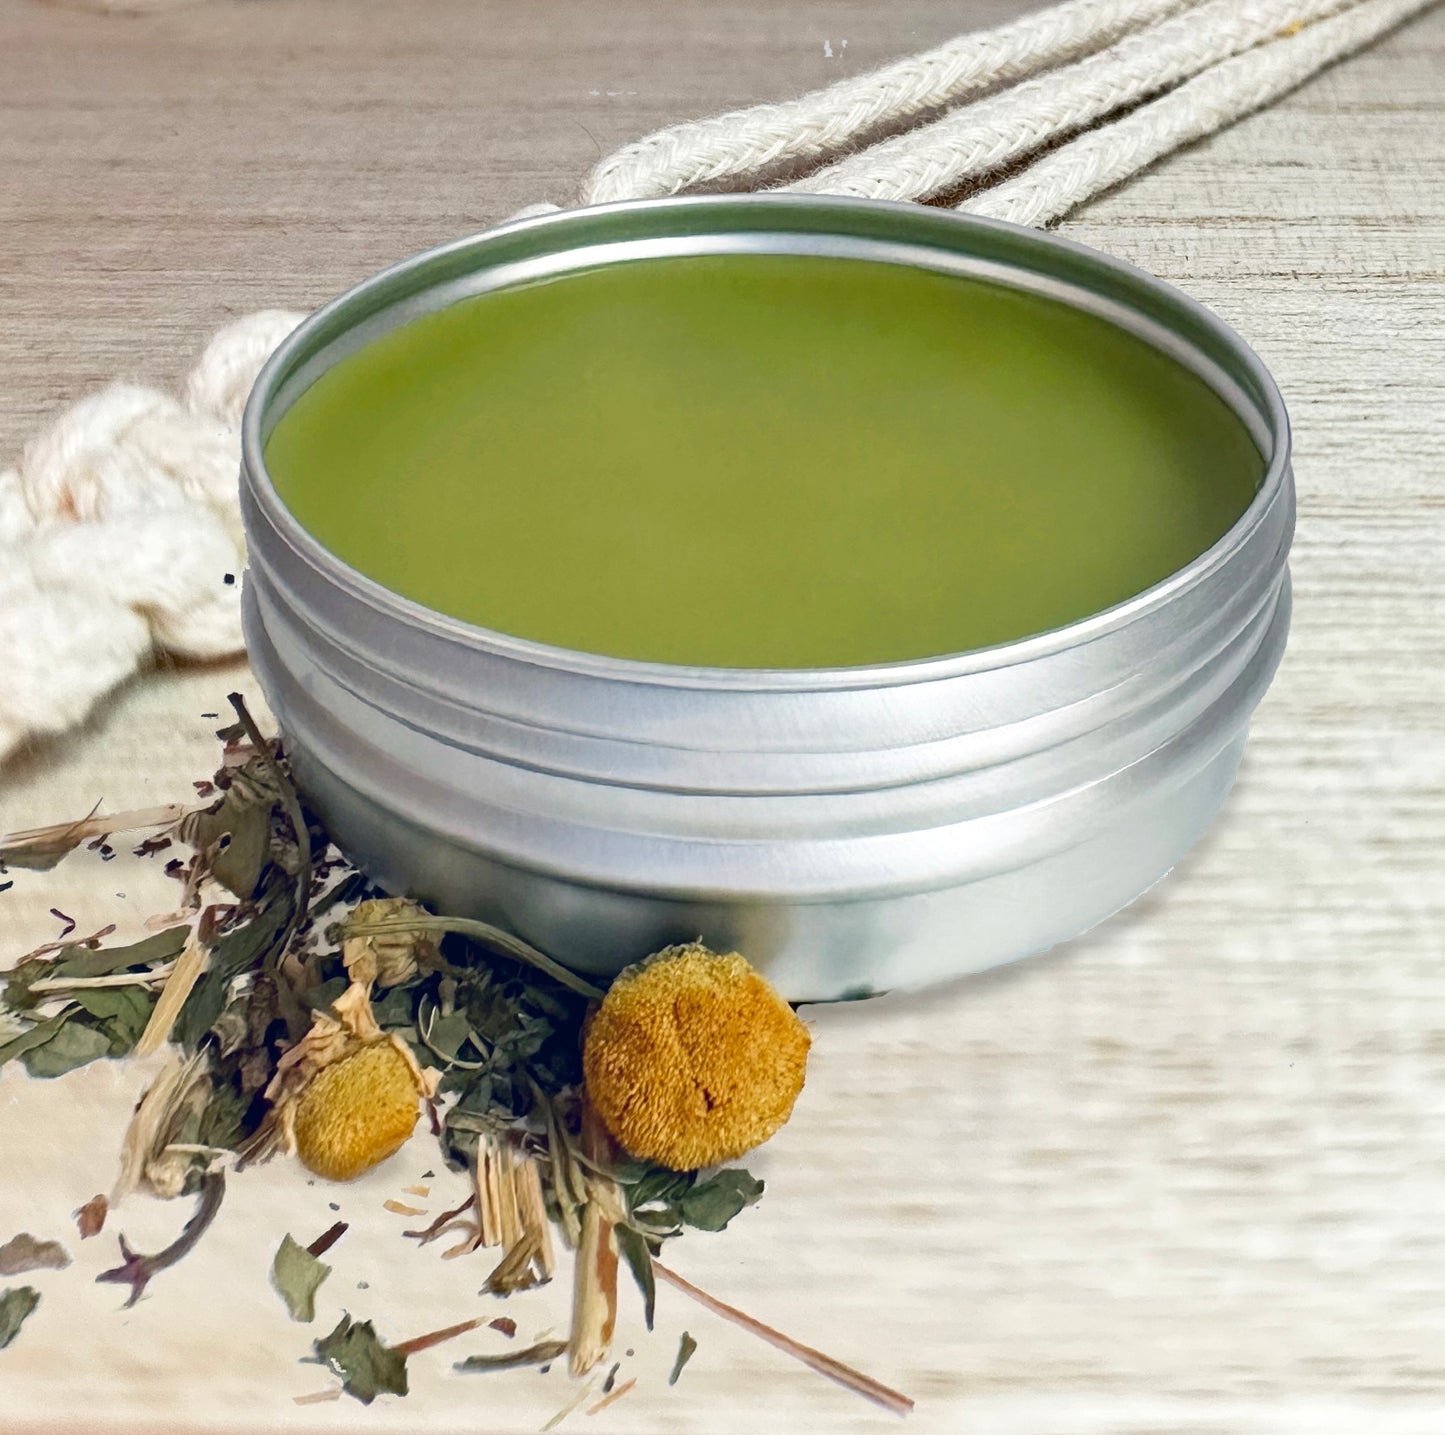 A natural salve to promote skin recovery and soothe irritation with its specialized blend of gentle ingredients.